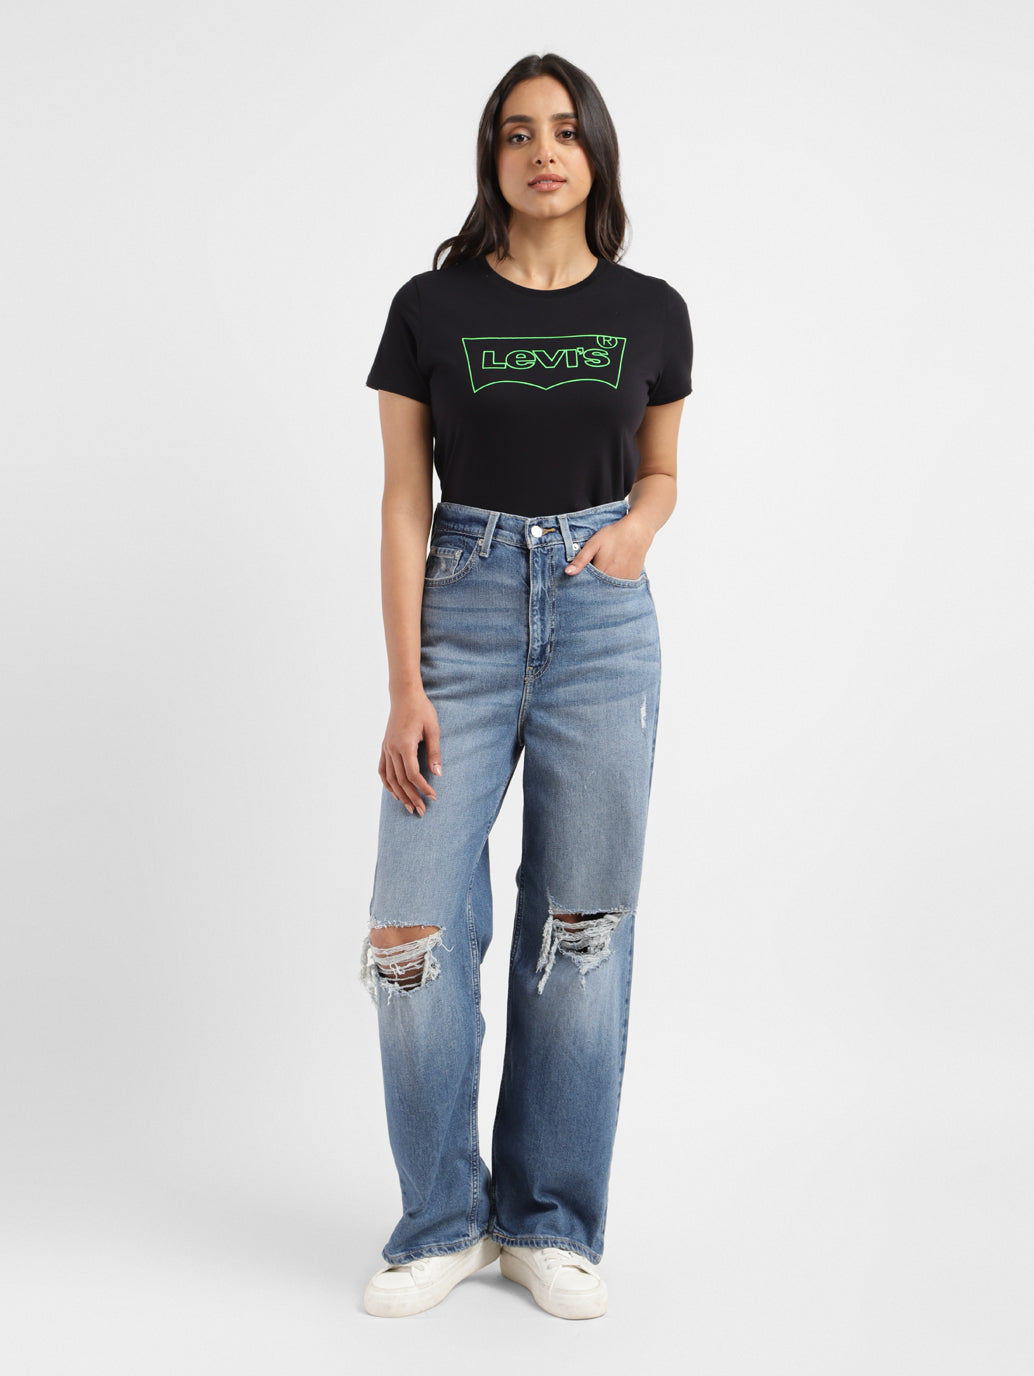 Buy Perfect Women's Loose Fit Jeans Online